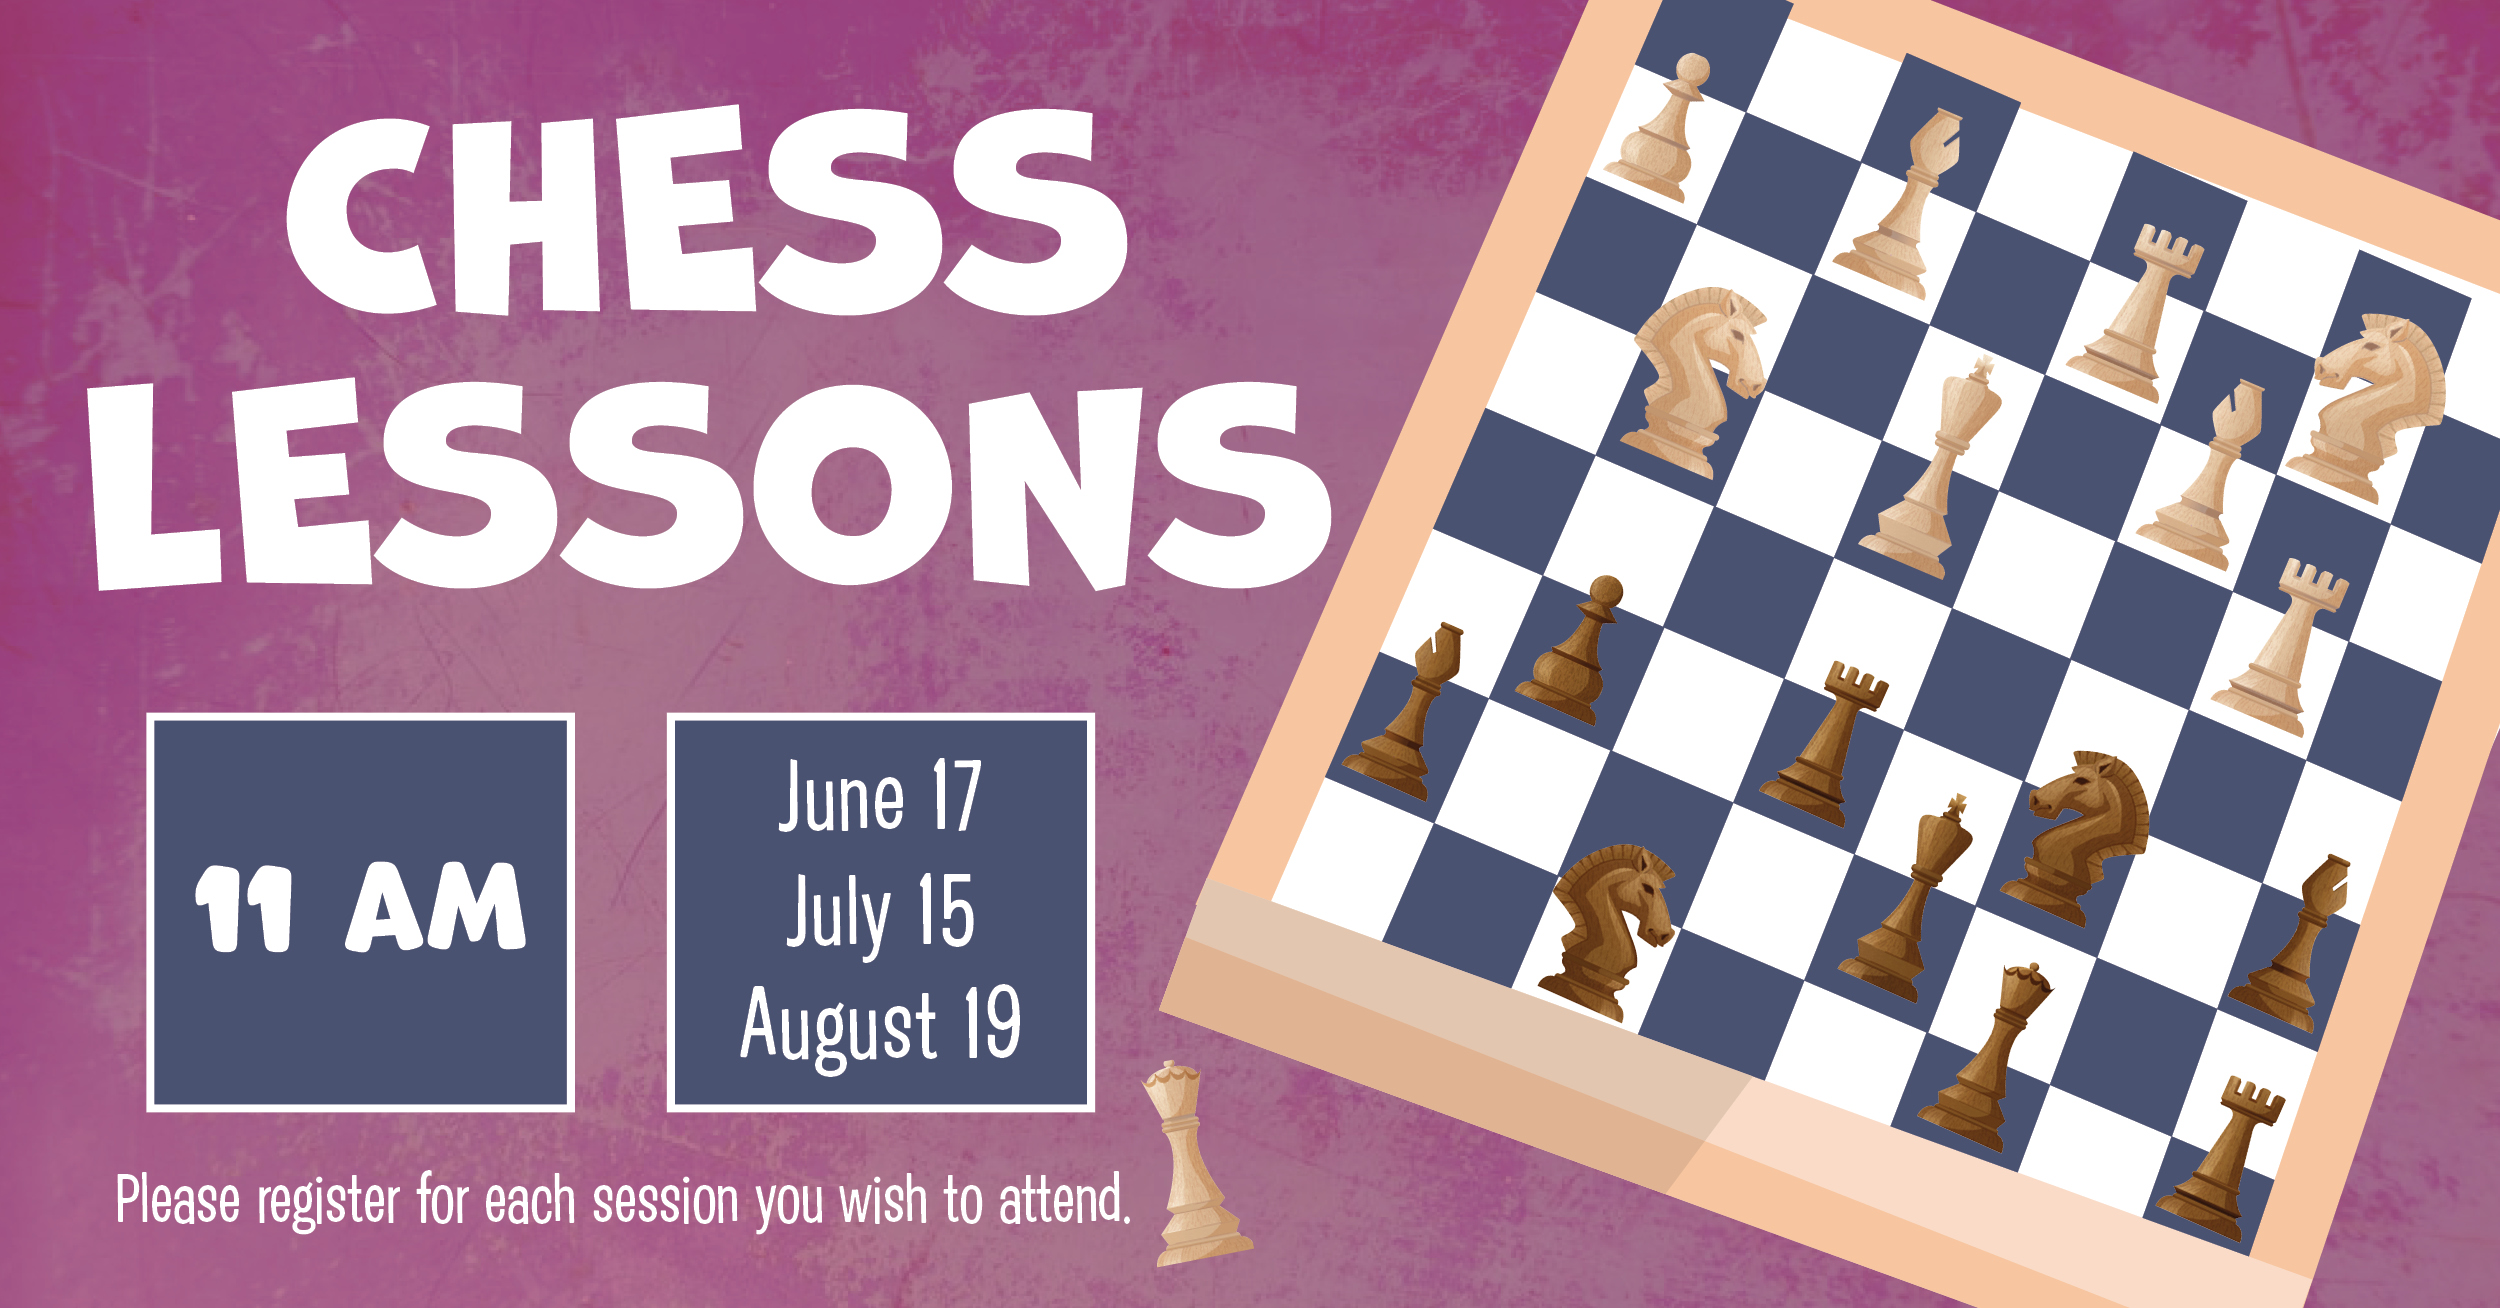 Chess Lessons eleven am June seventeenth, July fifteenth, and August ninteenth. Please register for each session you wish to attend. 